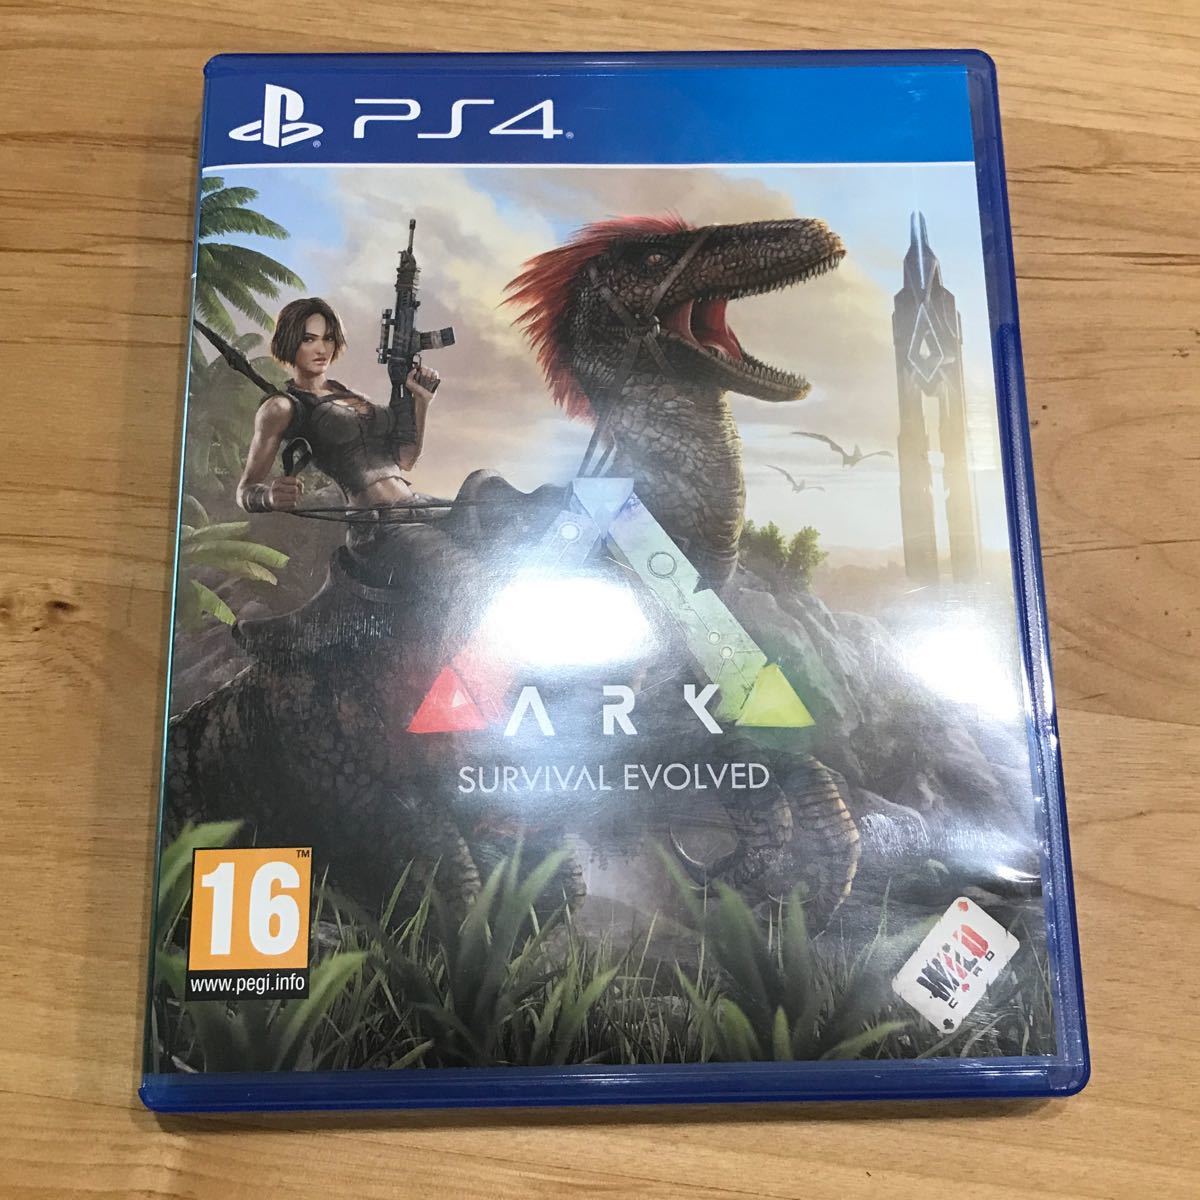 PS4 アークサバイバル エボルブド【PS4】 ARK: Survival Evolved [輸入版]